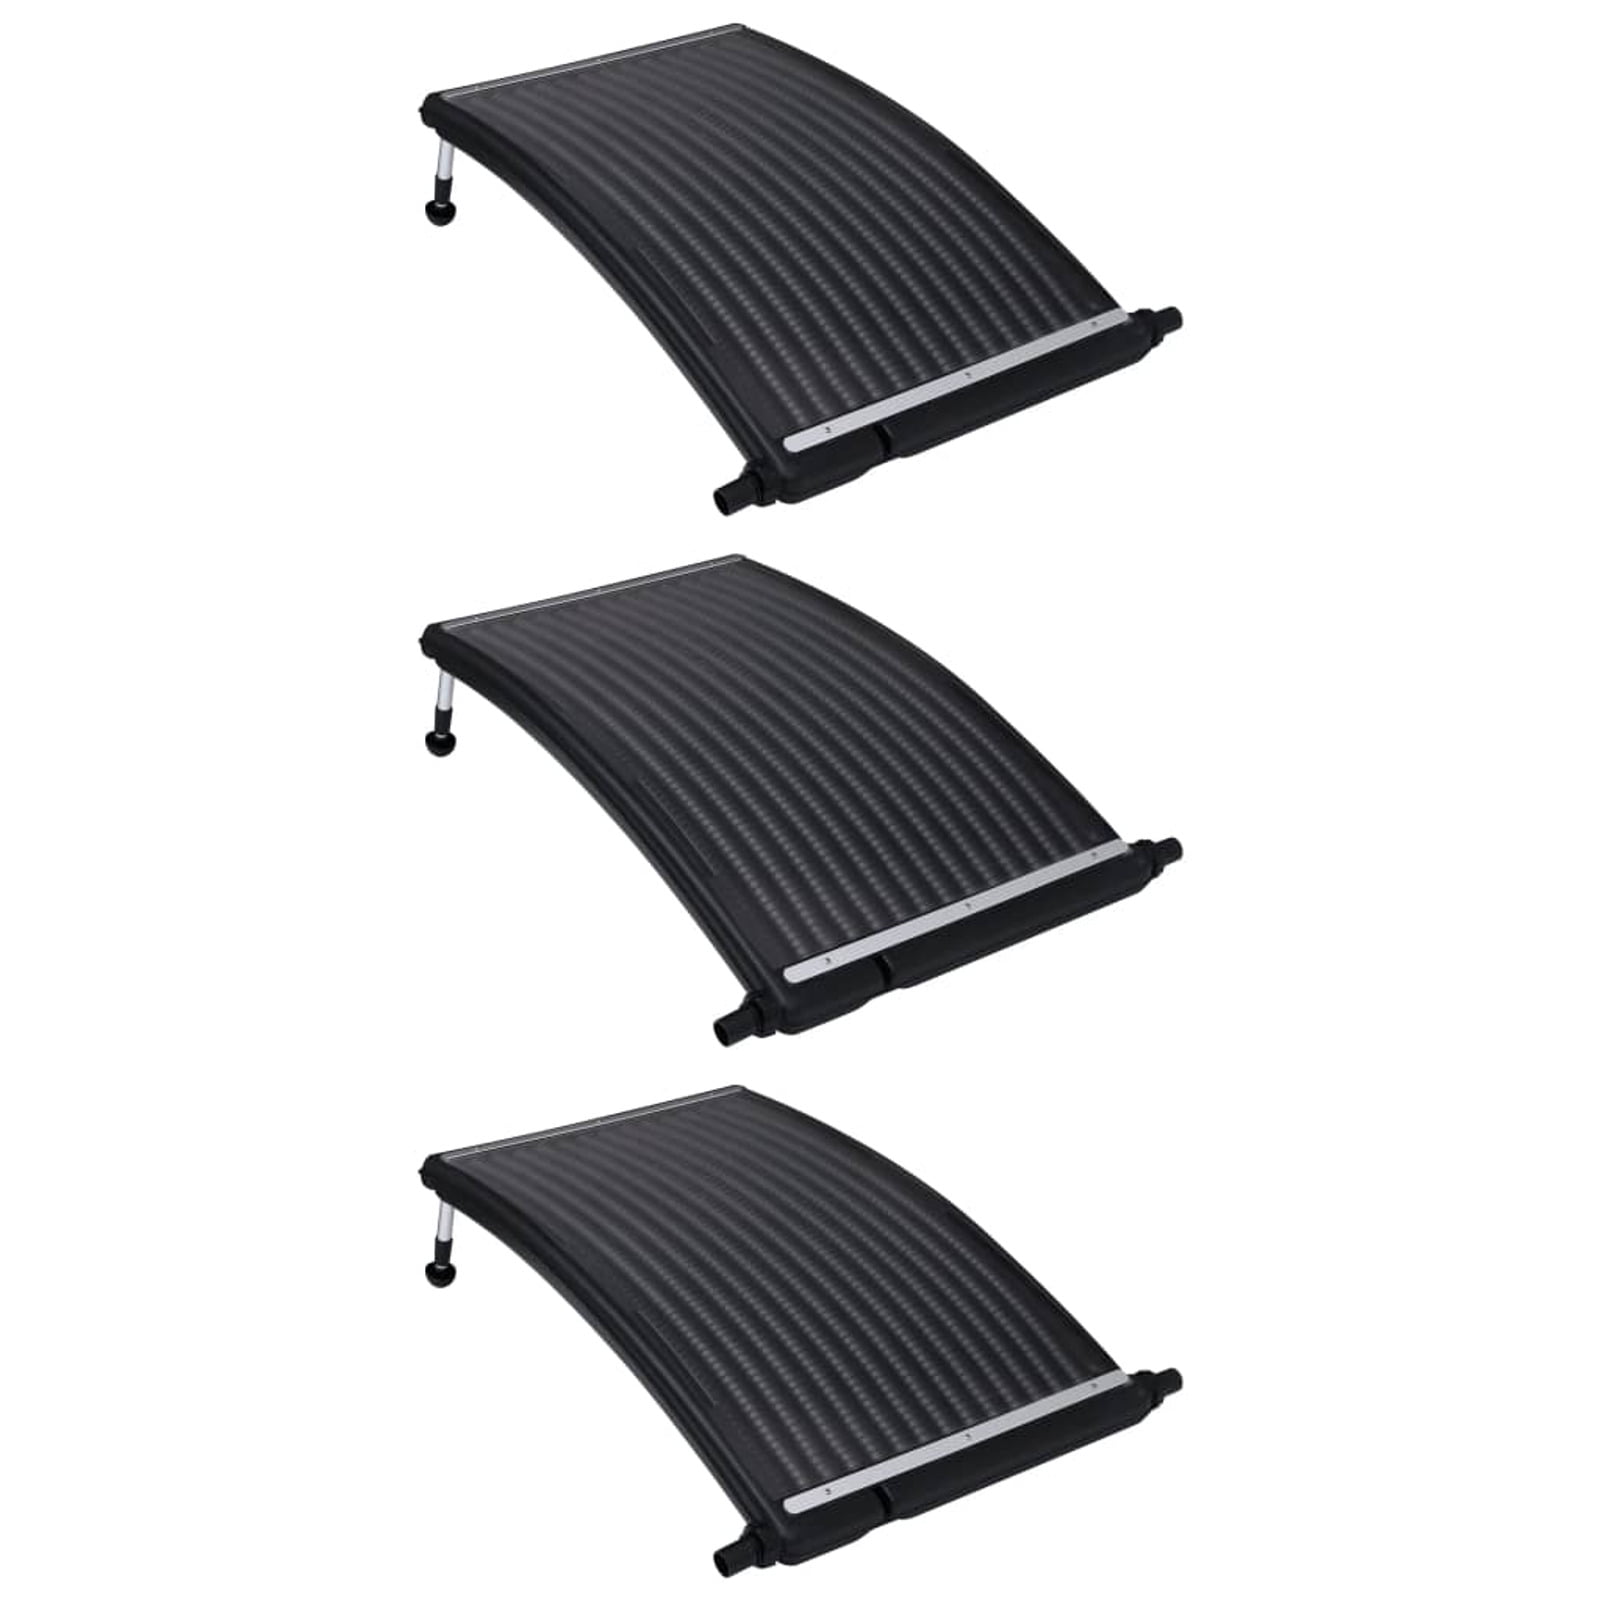 Details about   Curve Solar Pool Heater Panel Water Warmer for Above-Ground Swimming Pools 